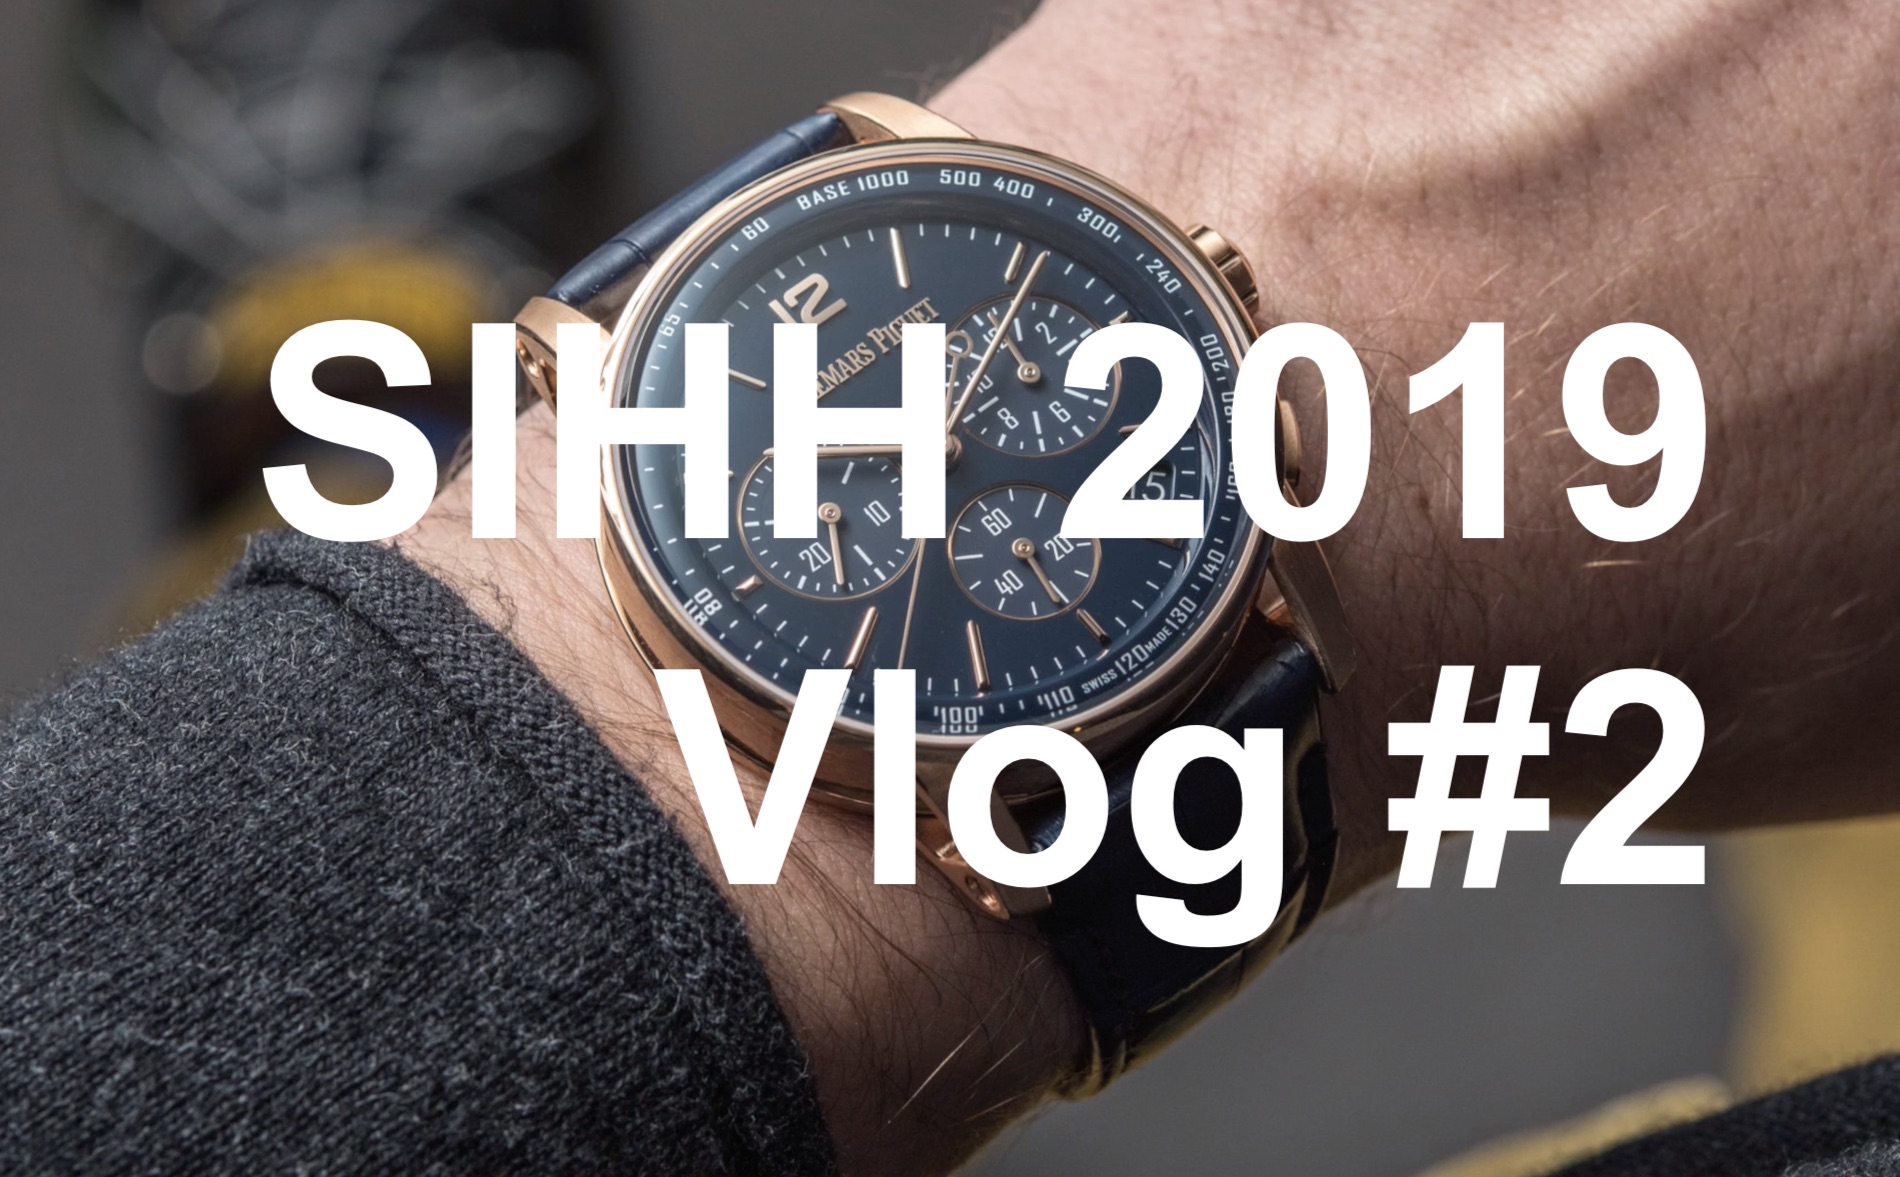 SIHH 2019 Vlog #2: The Watch Hits, Misses, & Surprises